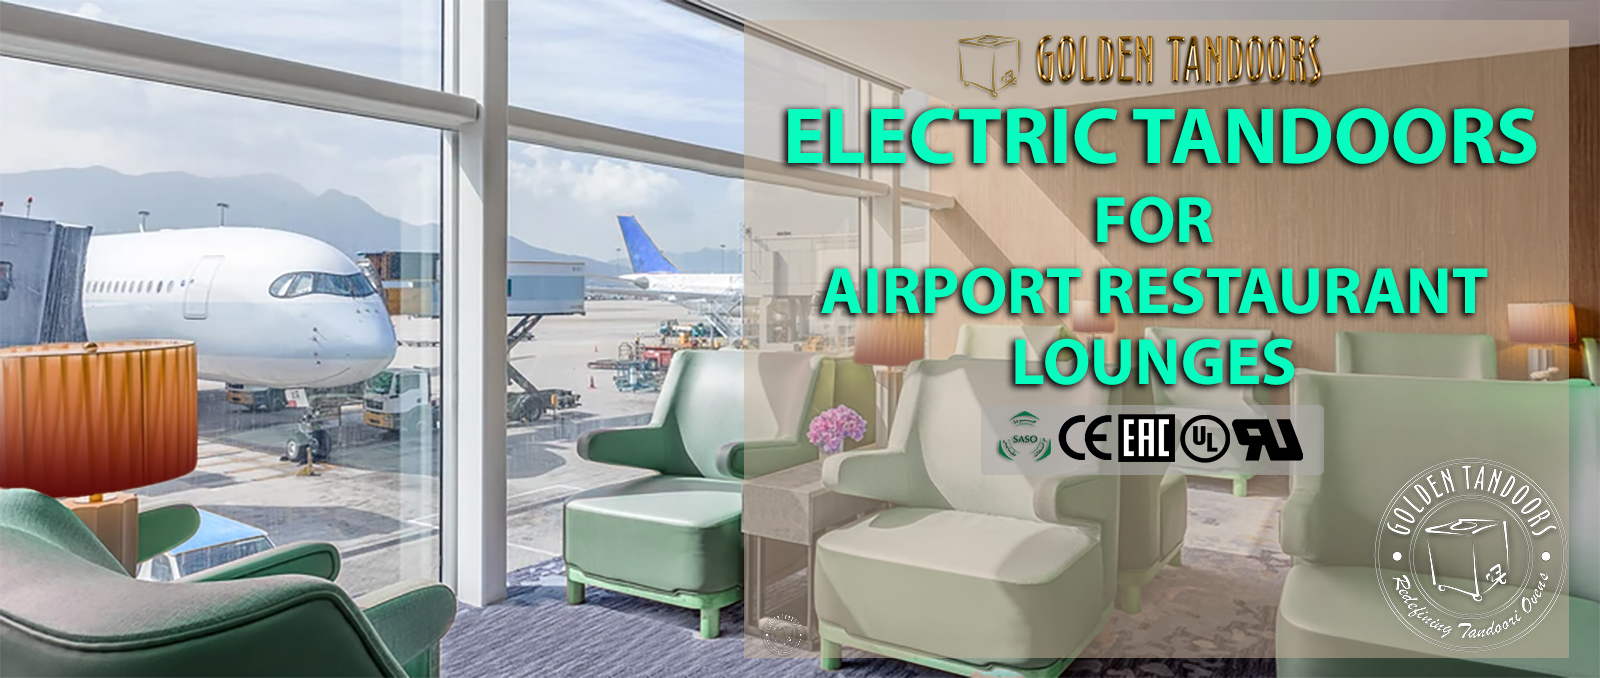 airport lounges electric tandoor oven